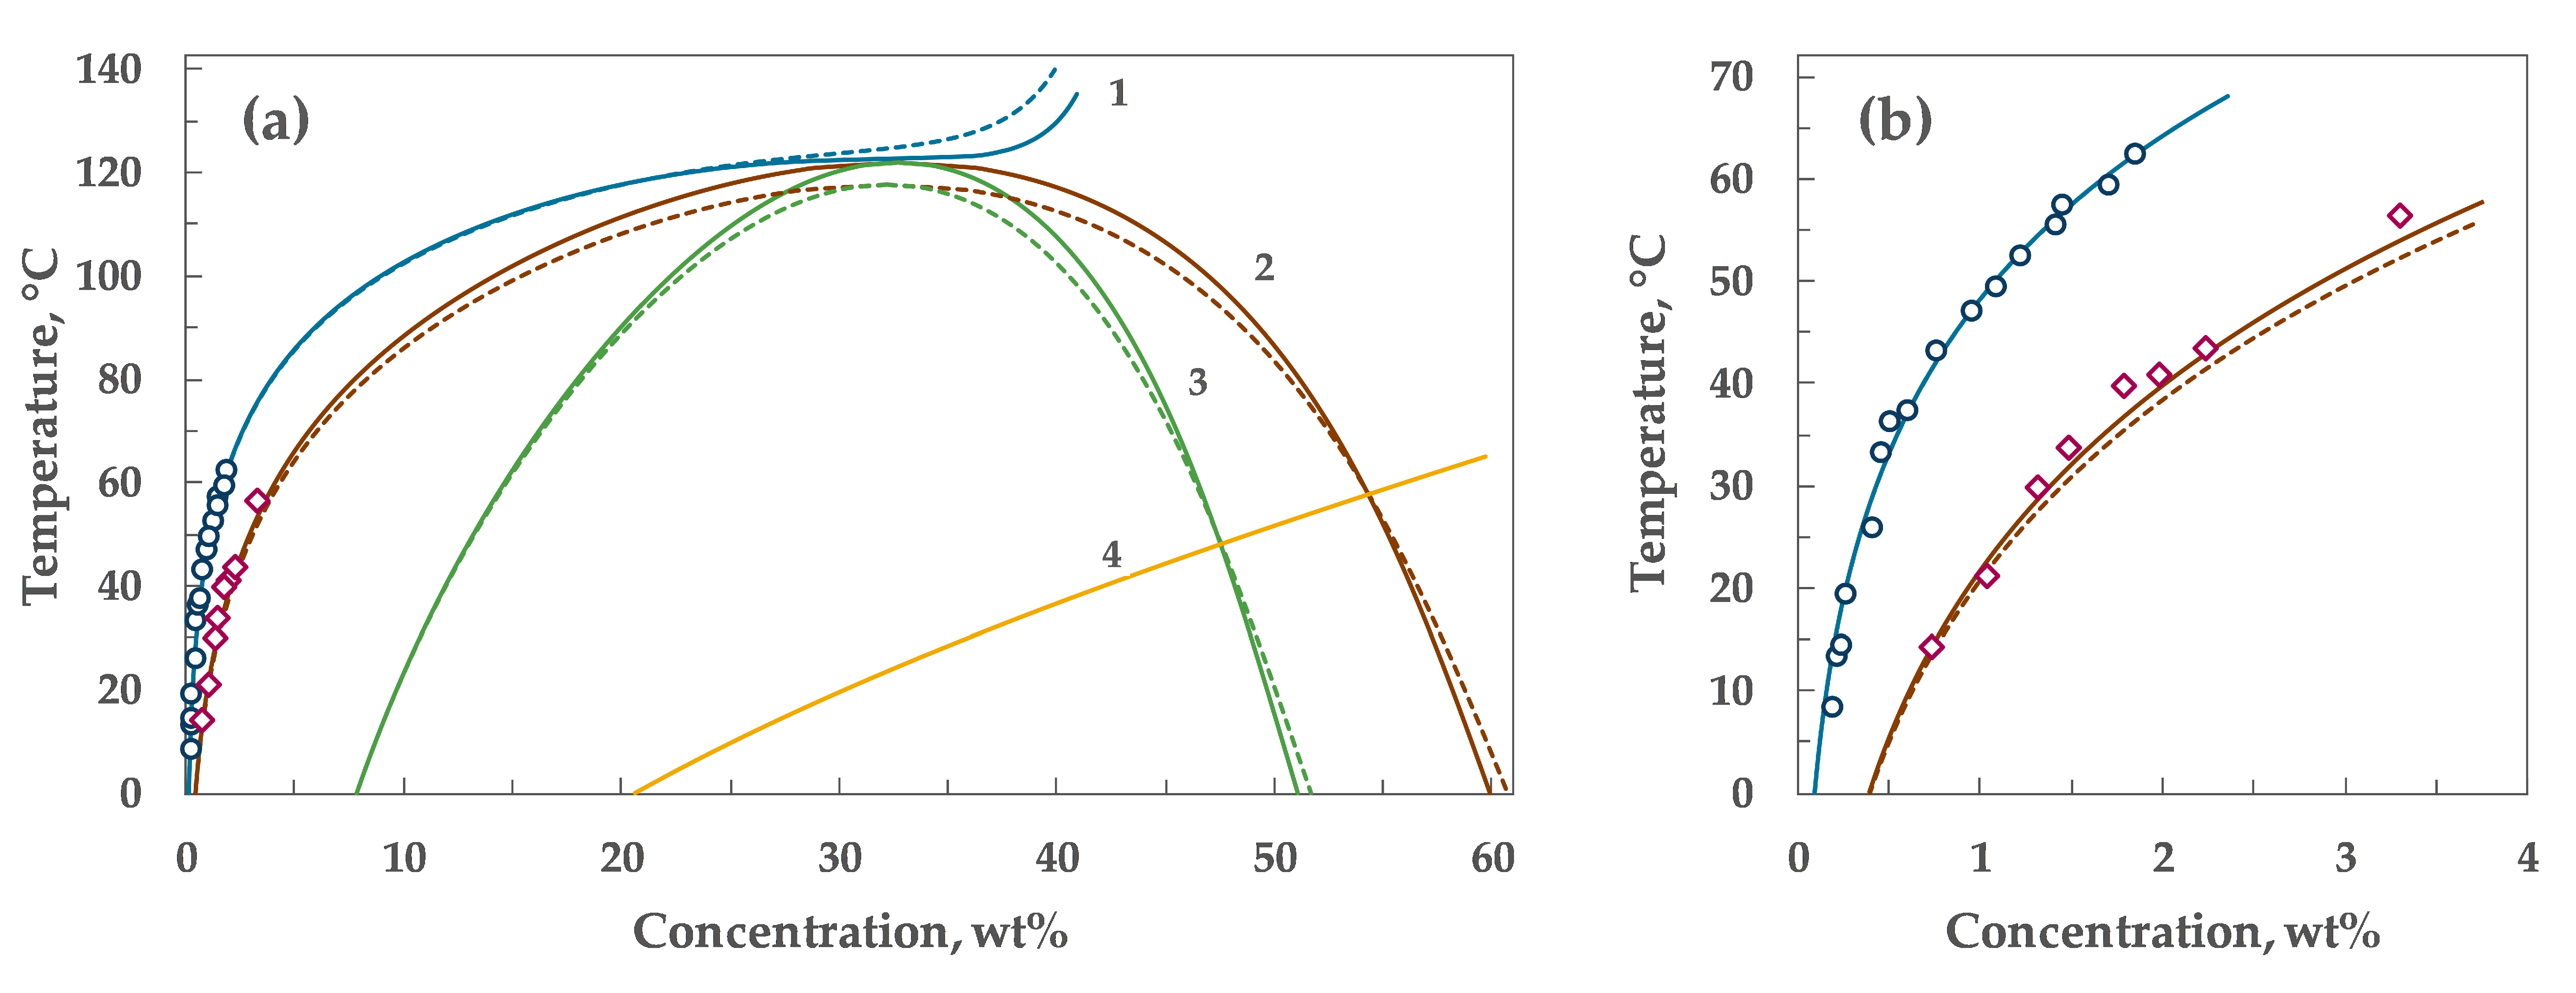 Processes Free Full Text A Thermodynamic Approach For The Prediction Of Oiling Out Boundaries From Solubility Data Html